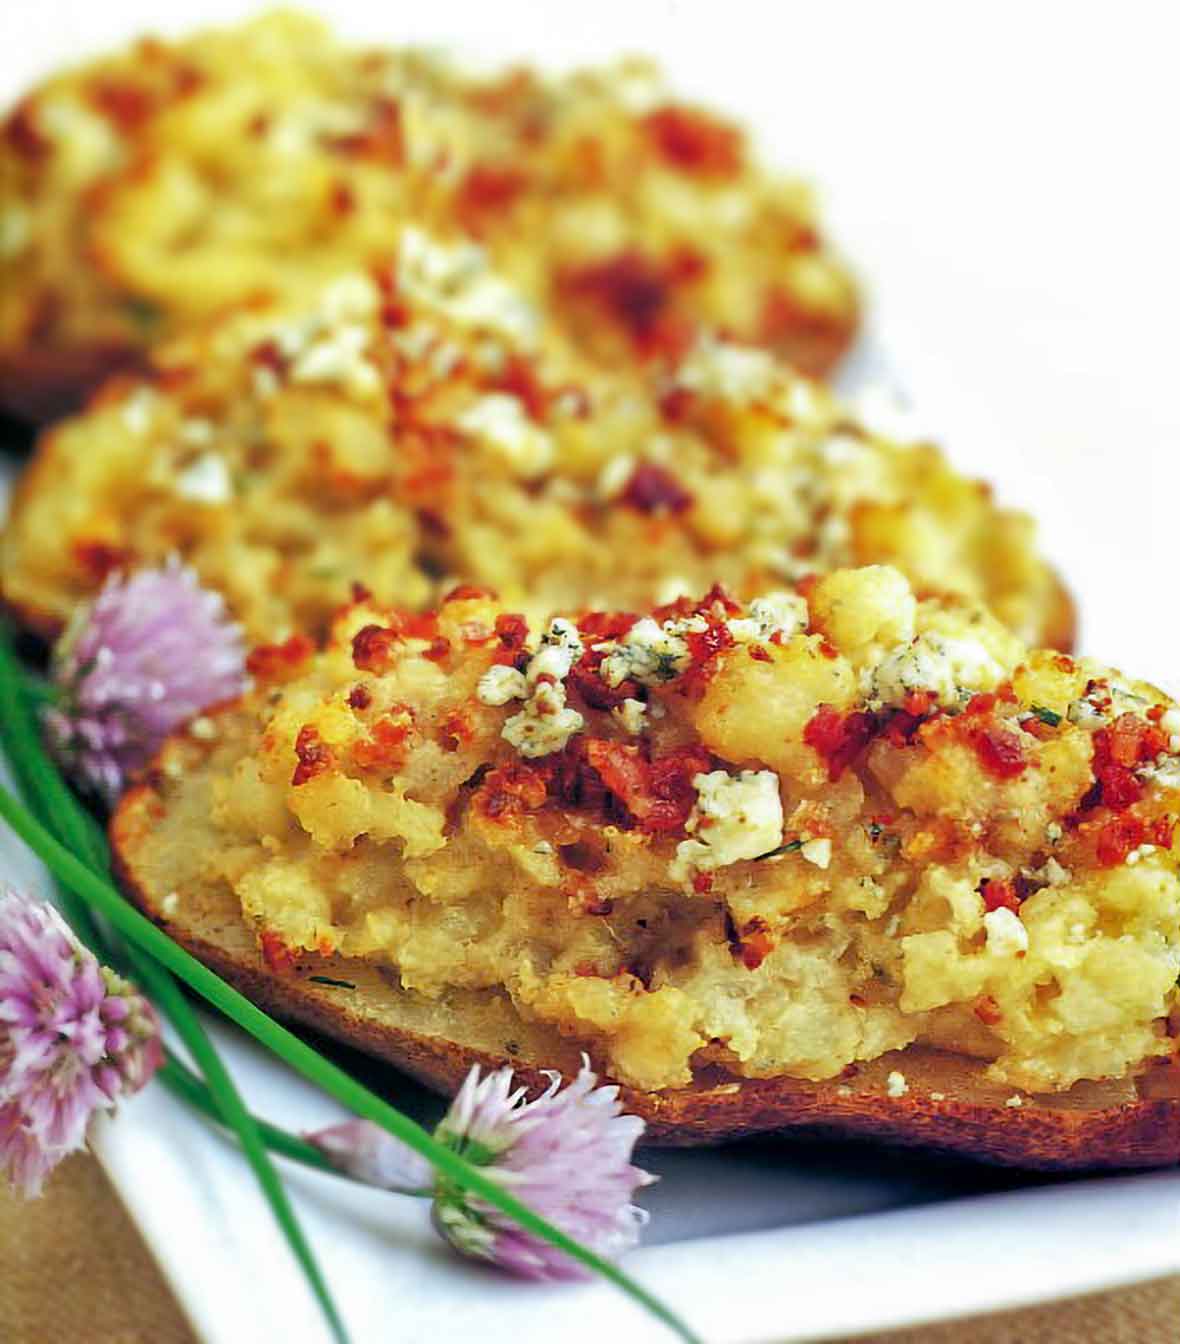 Three twice-baked potatoes with pancetta stuffing on a platter